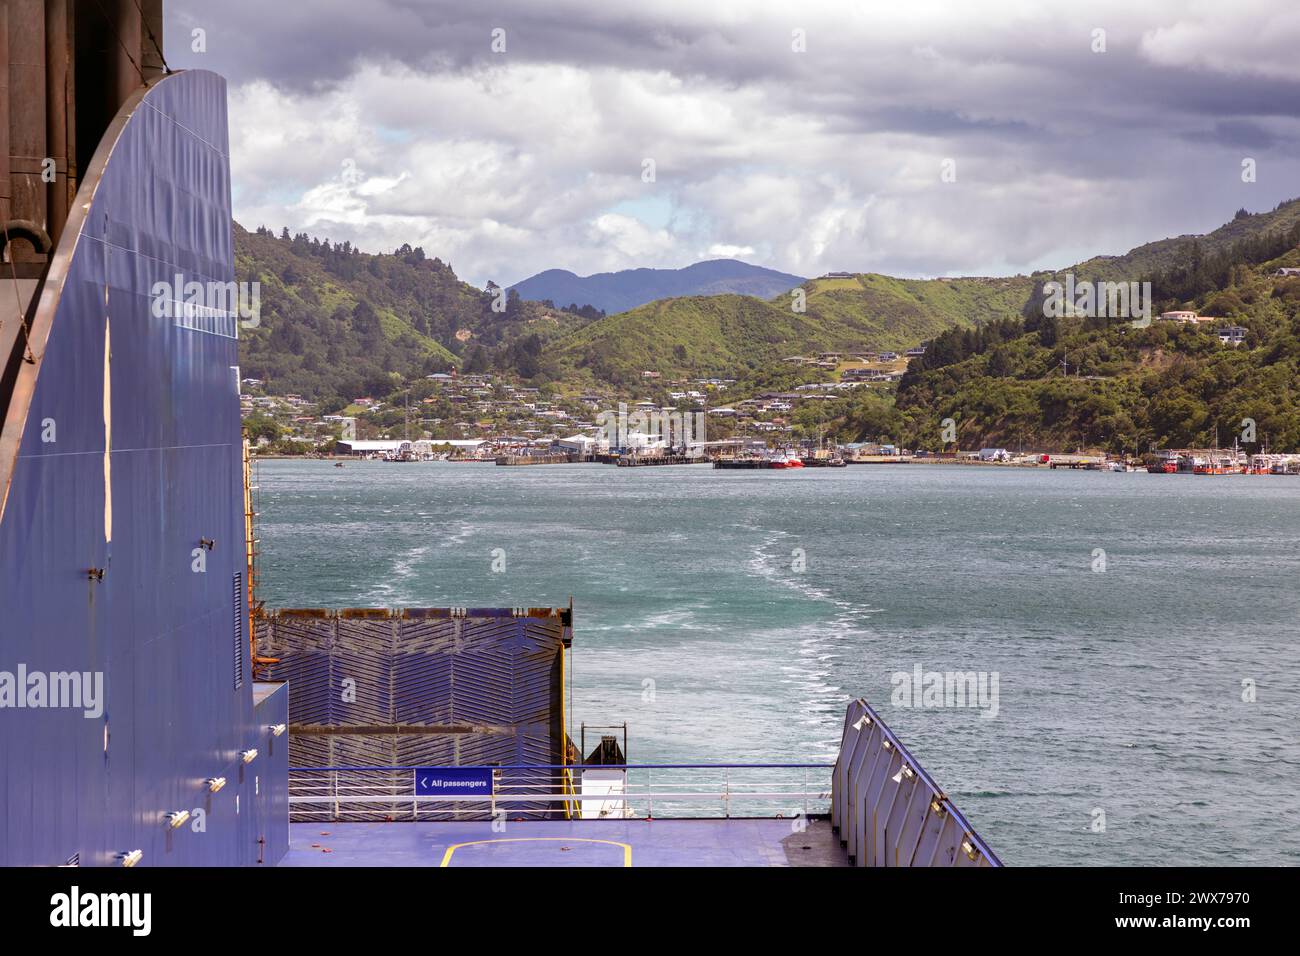 The town of Picton on the north end of the South Island of New Zealand is seen from a ferry headed to the Cook Strait and Wellington. Stock Photo